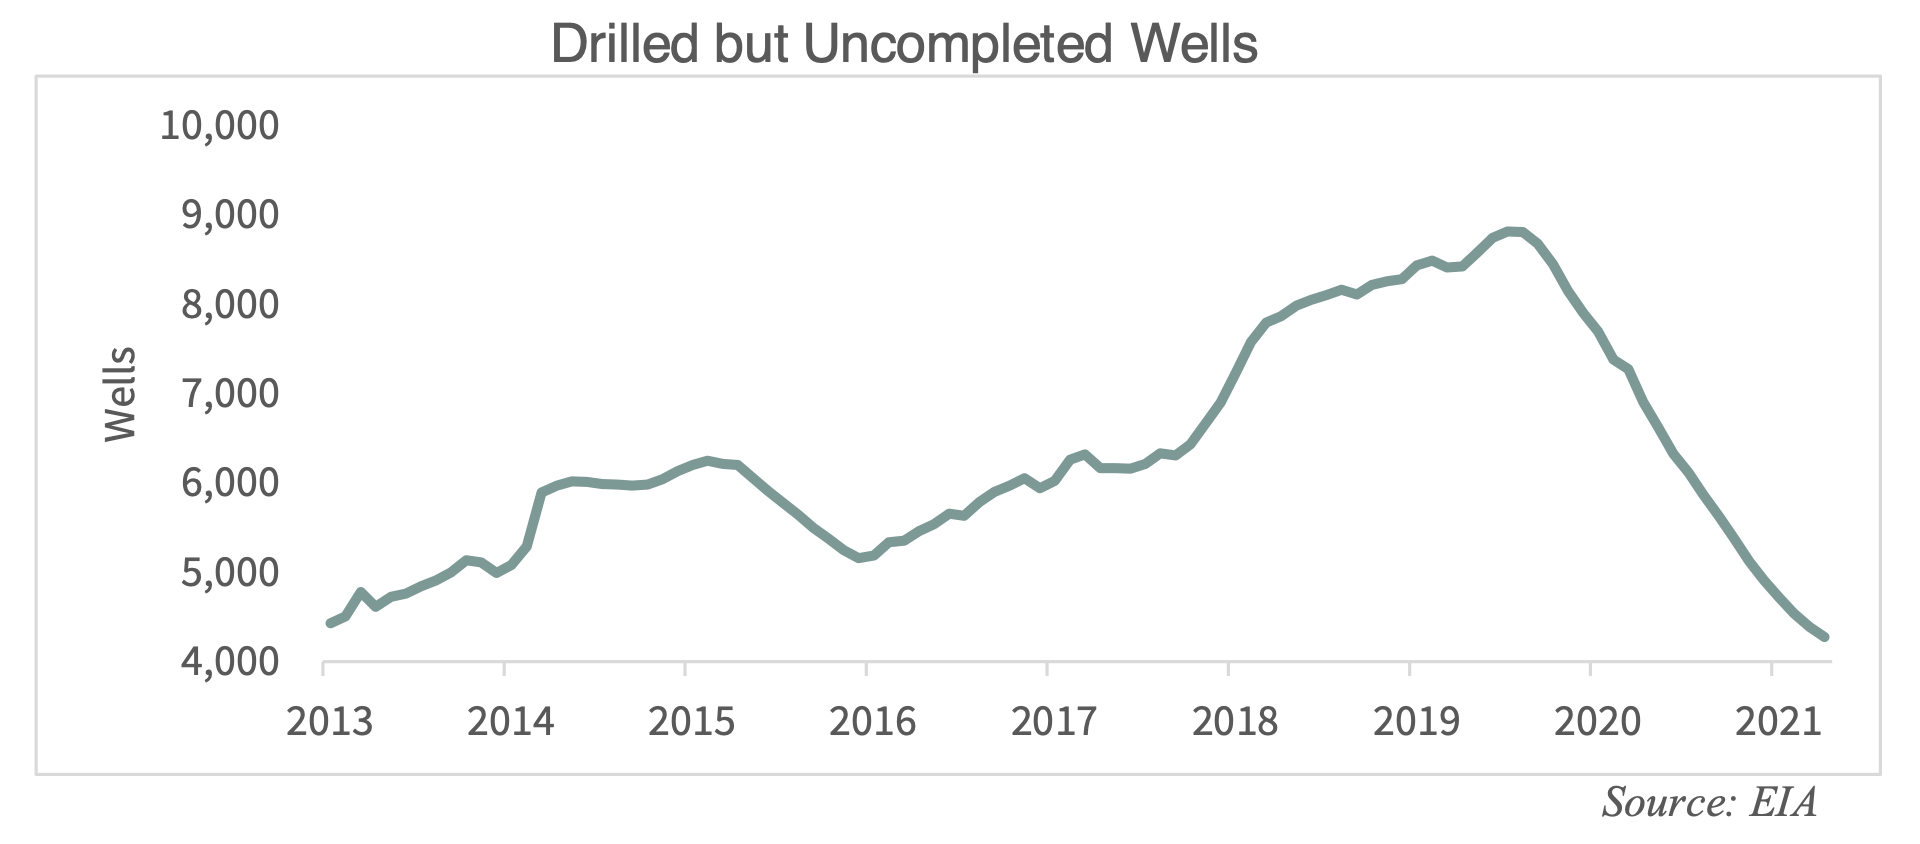 GR Blog #319 - Drilled but Uncompleted Wells